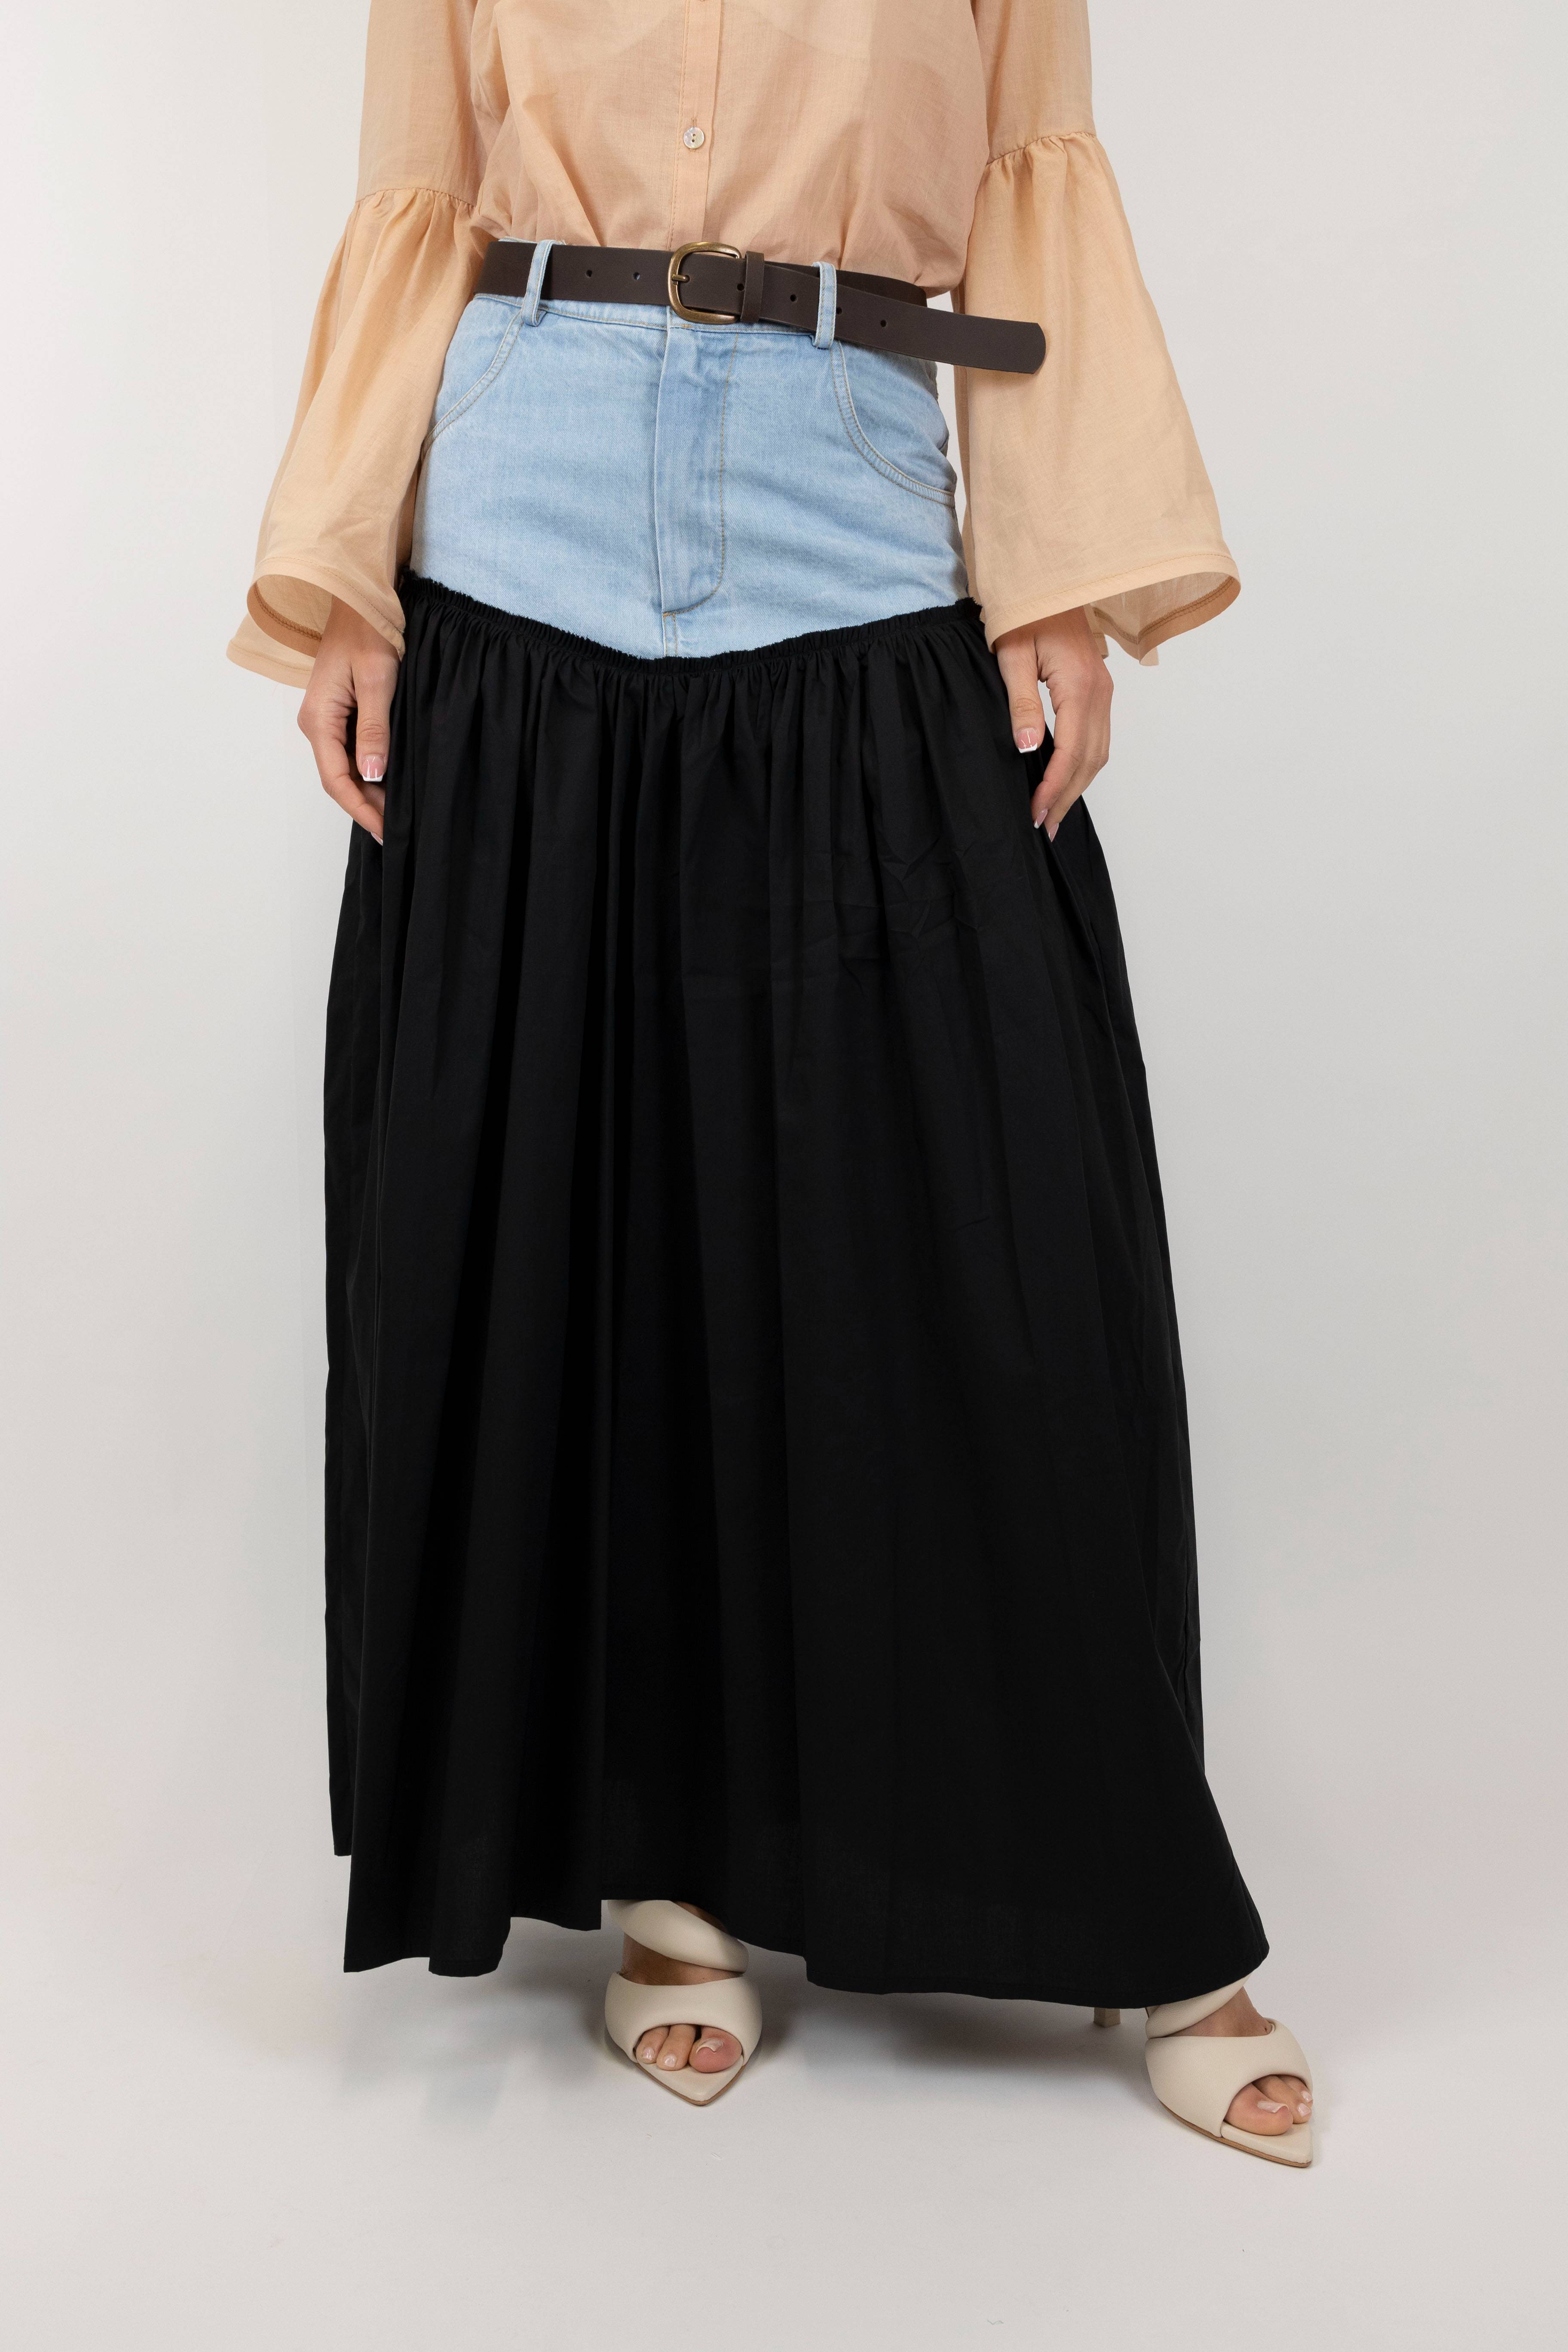 Tension in - Double fabric skirt